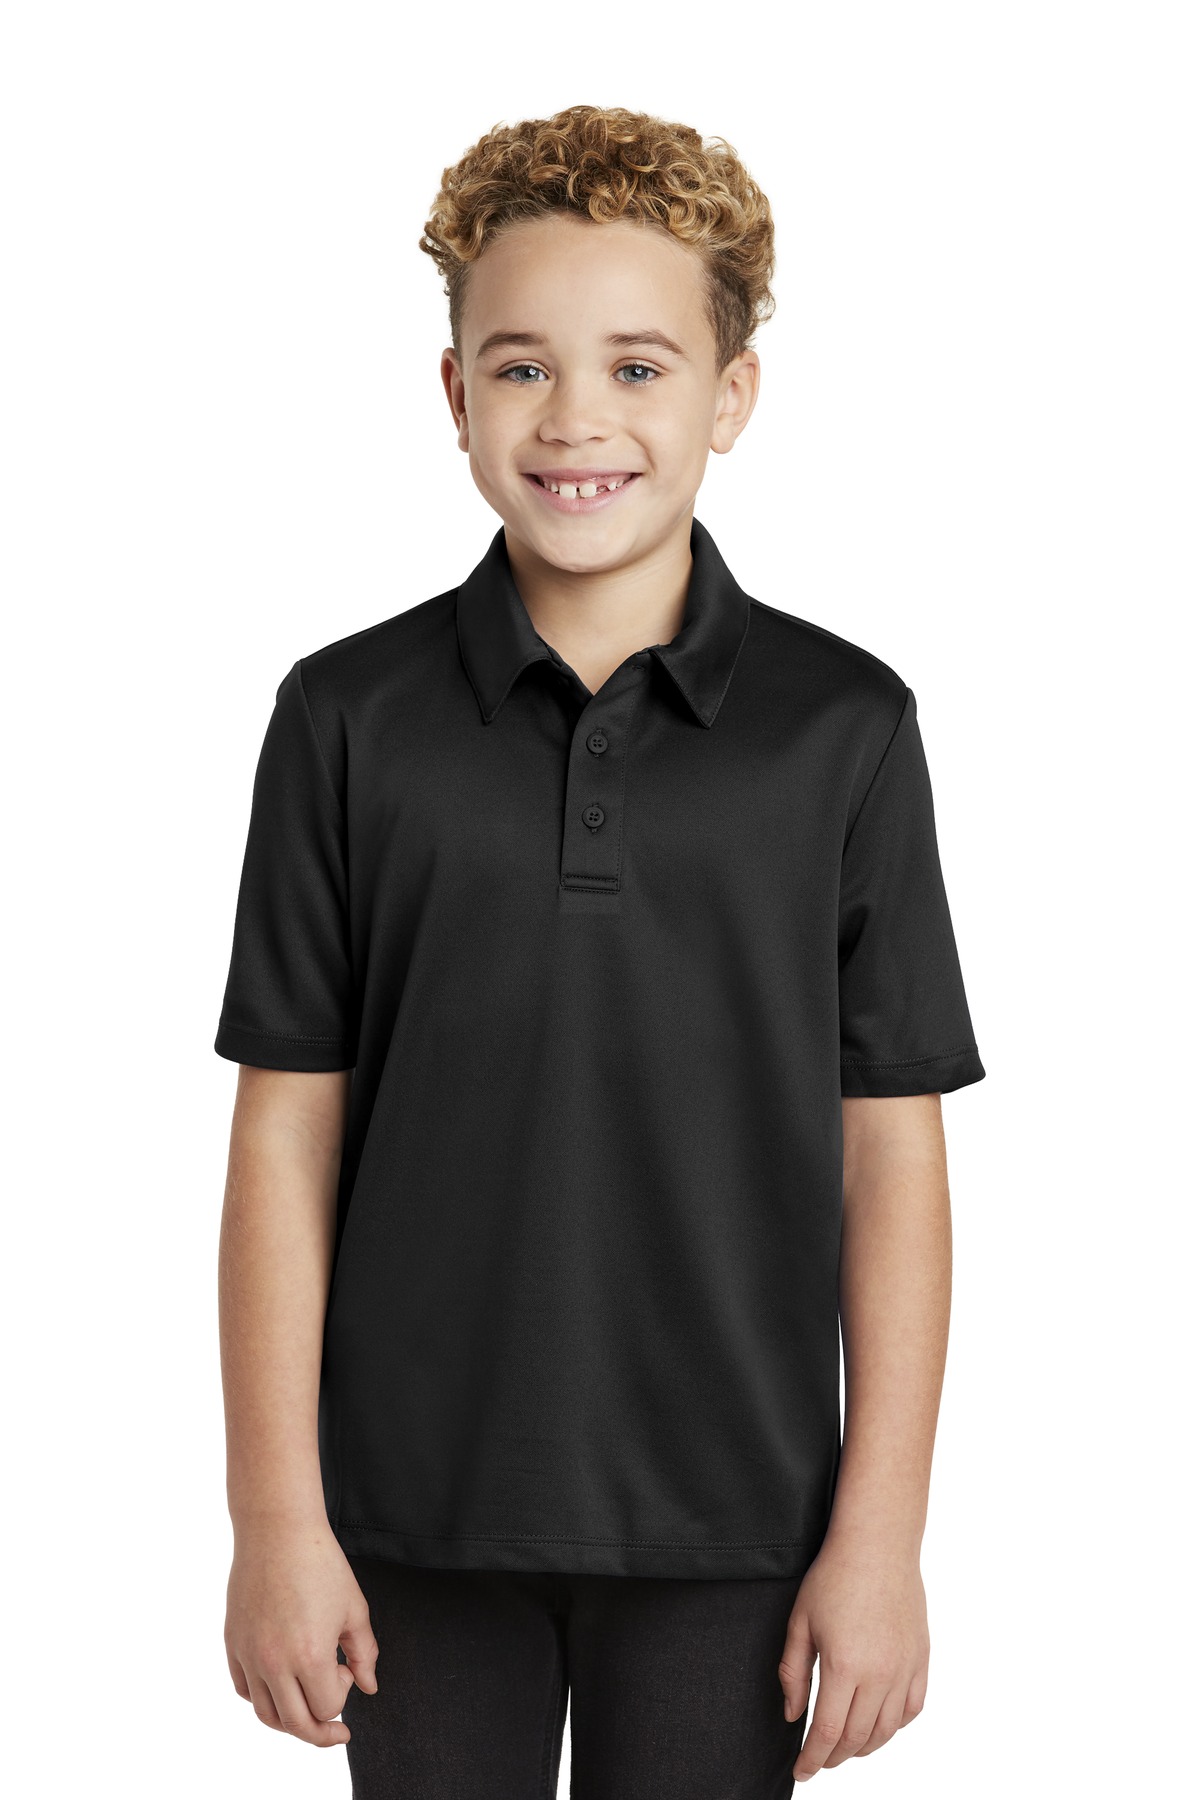 Port Authority Corporate Hospitality Youth Polos&Knits ® Youth Silk Touch Performance Polo.-Port Authority